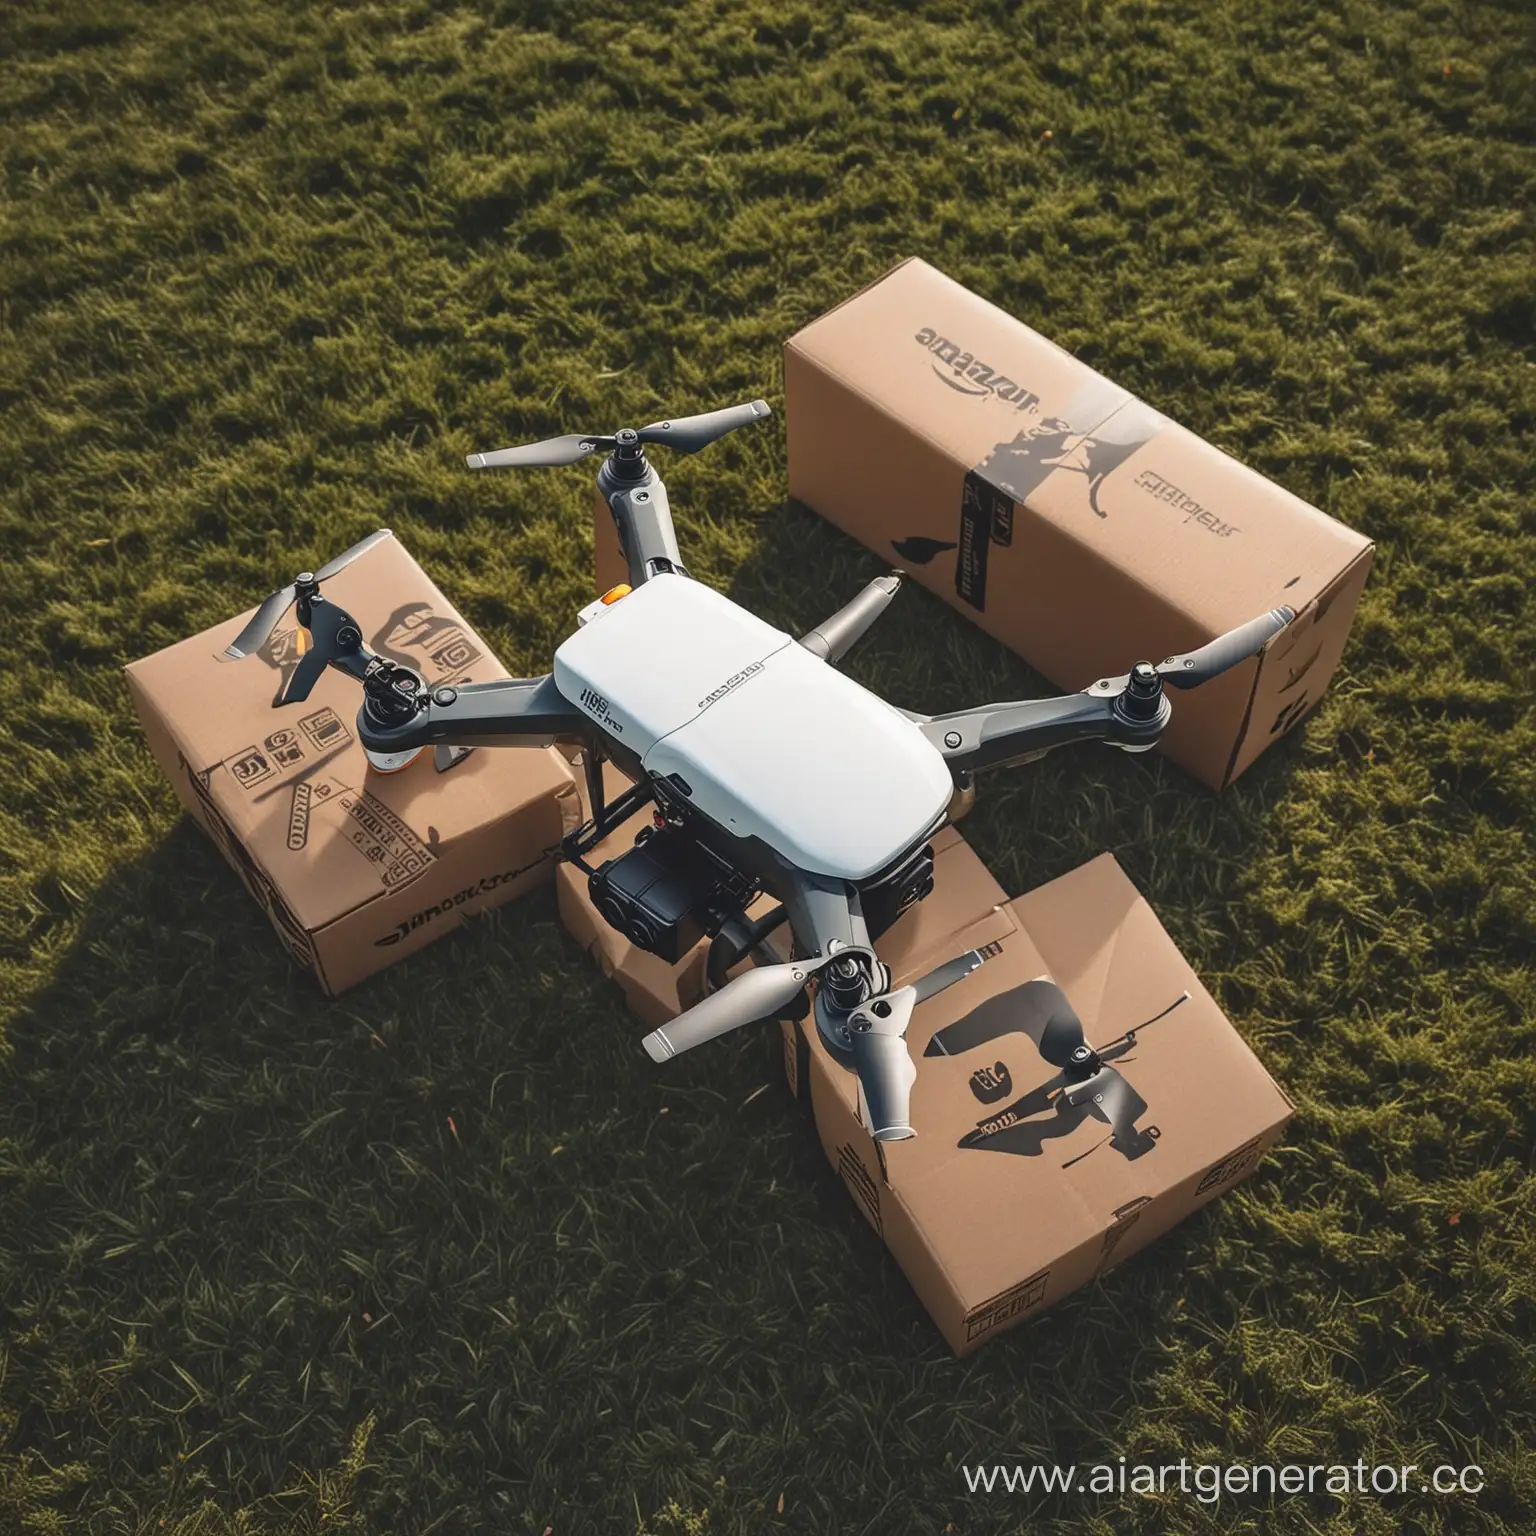 Amazon-Drone-Delivery-Fast-and-Convenient-Shopping-Experience